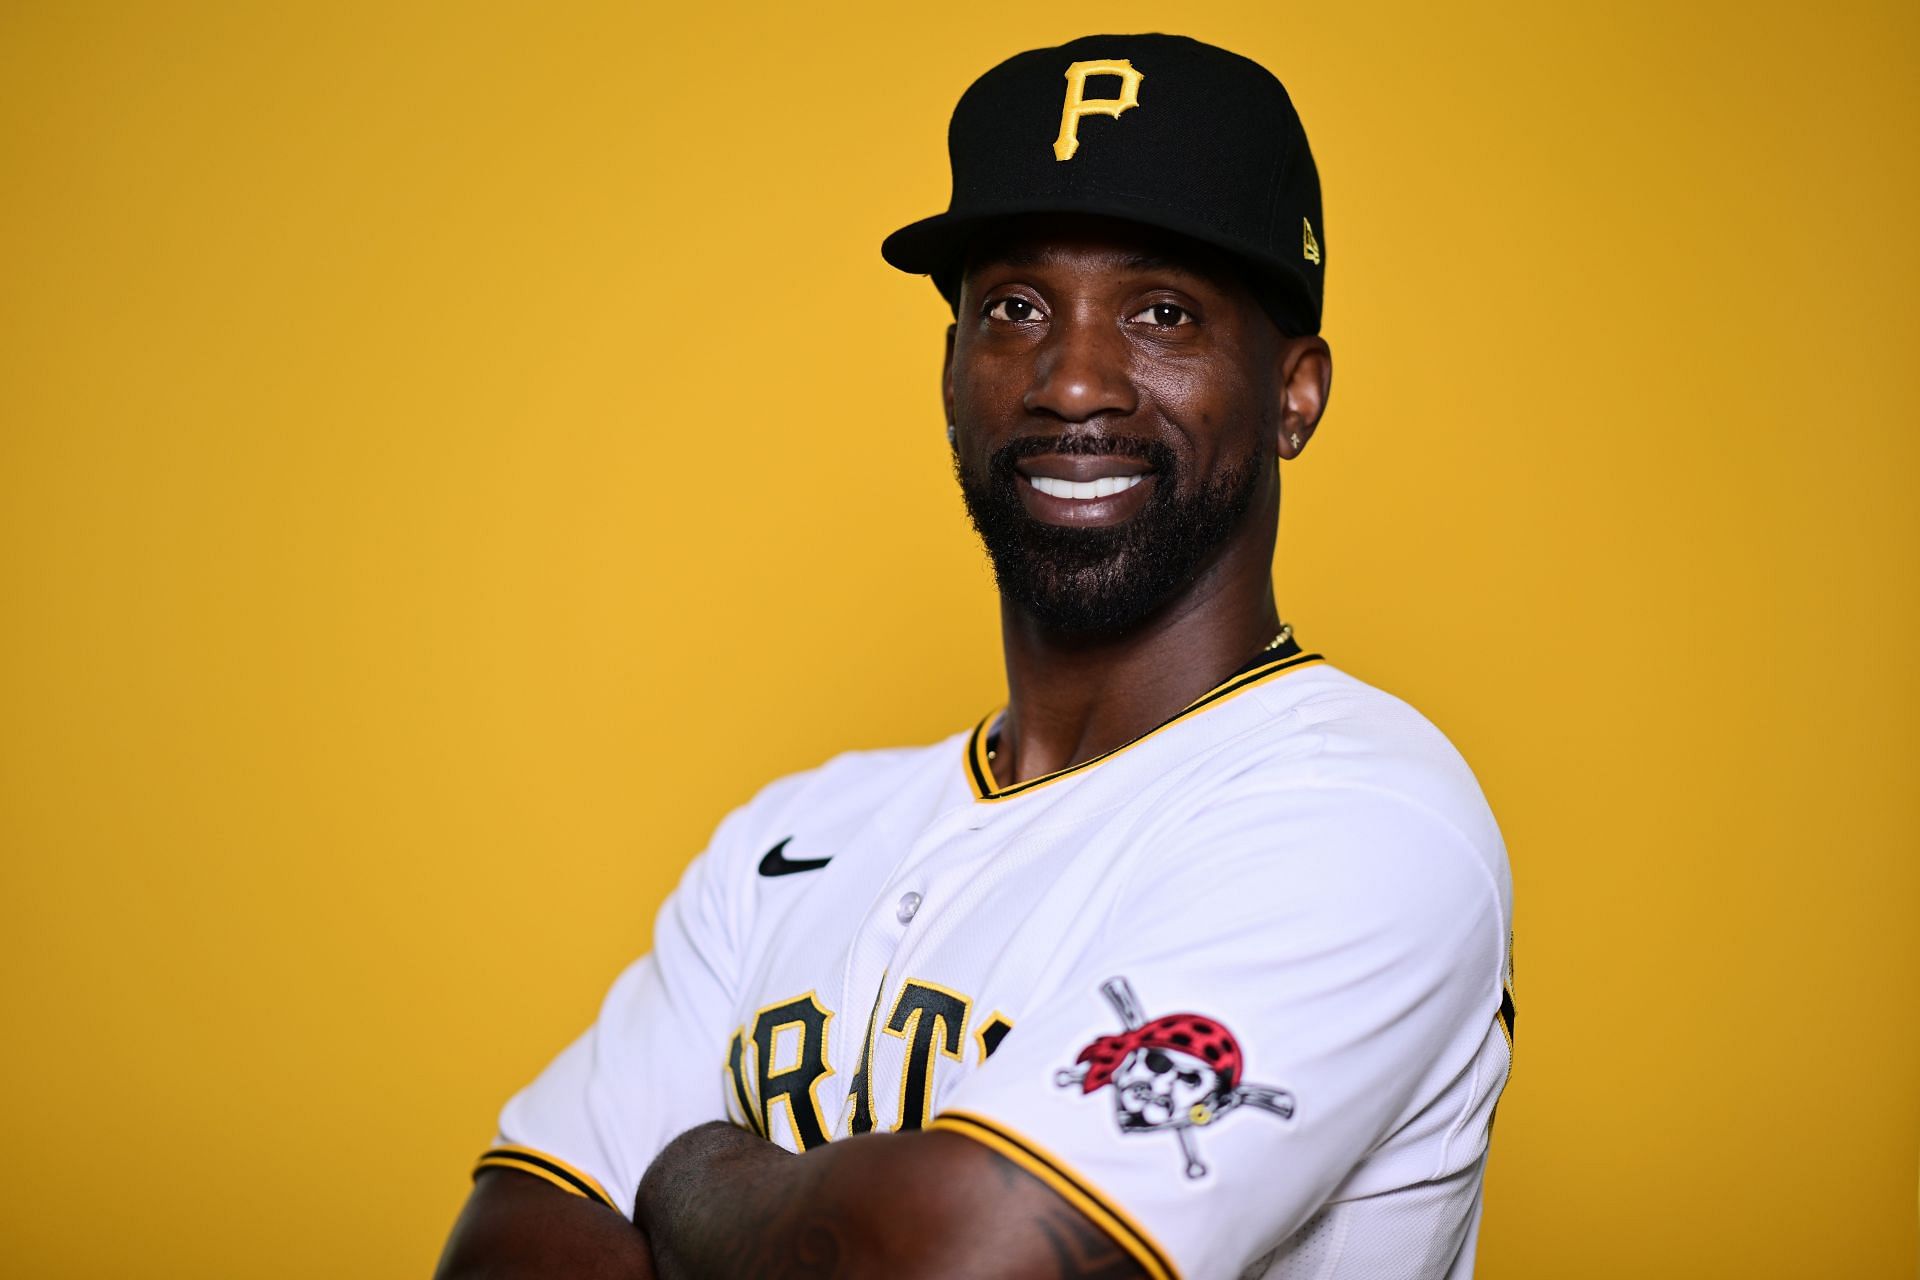 Andrew McCutchen Pittsburgh Pirates Launches One Legendary